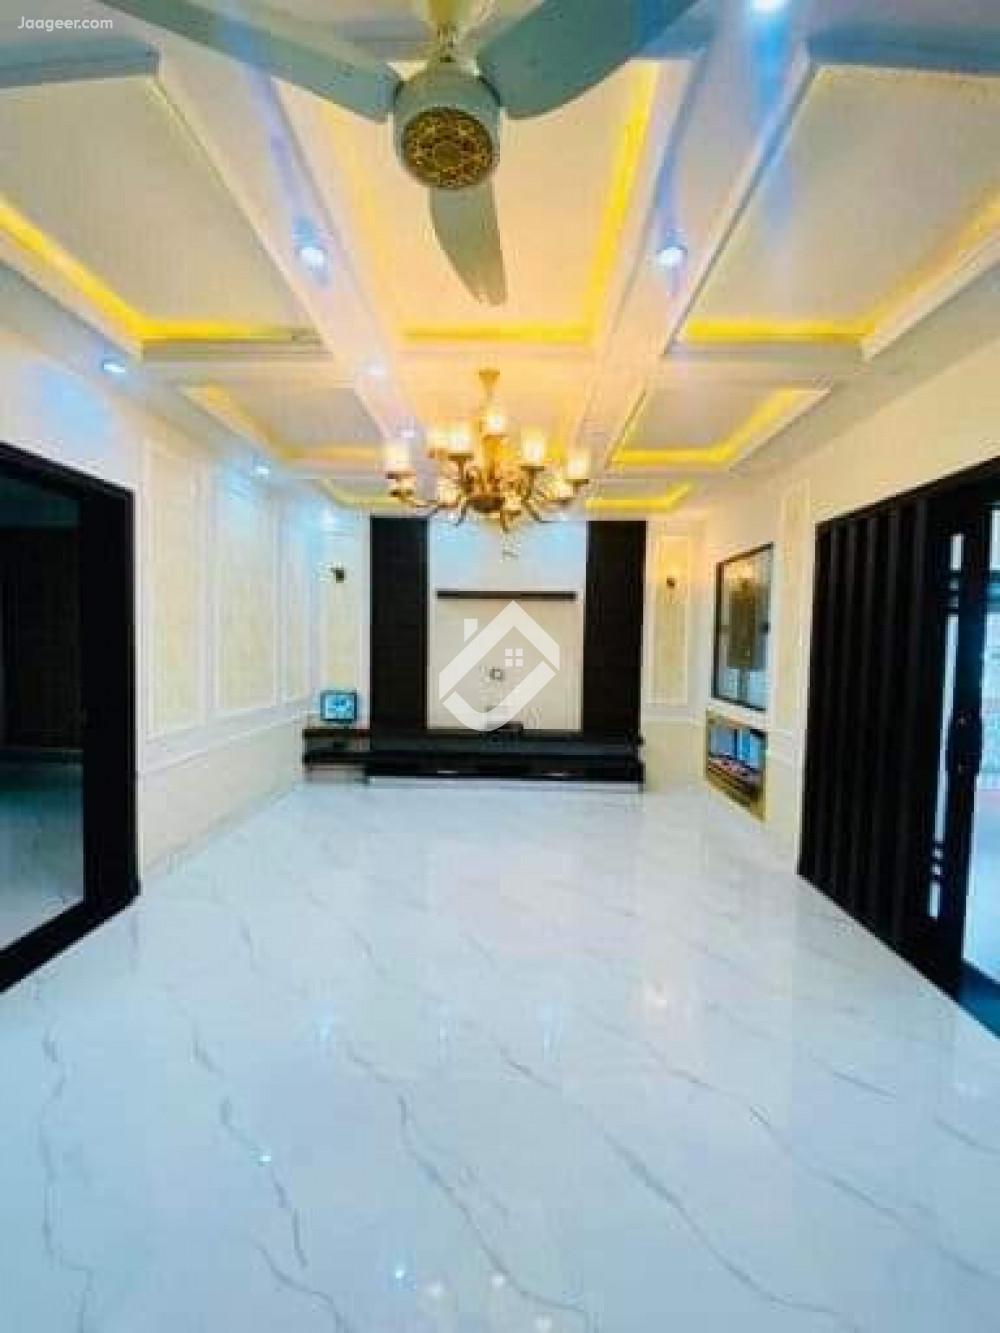 Main image 11 Marla Double Storey House For Sale In Bahria Town  Bahria Town, Lahore